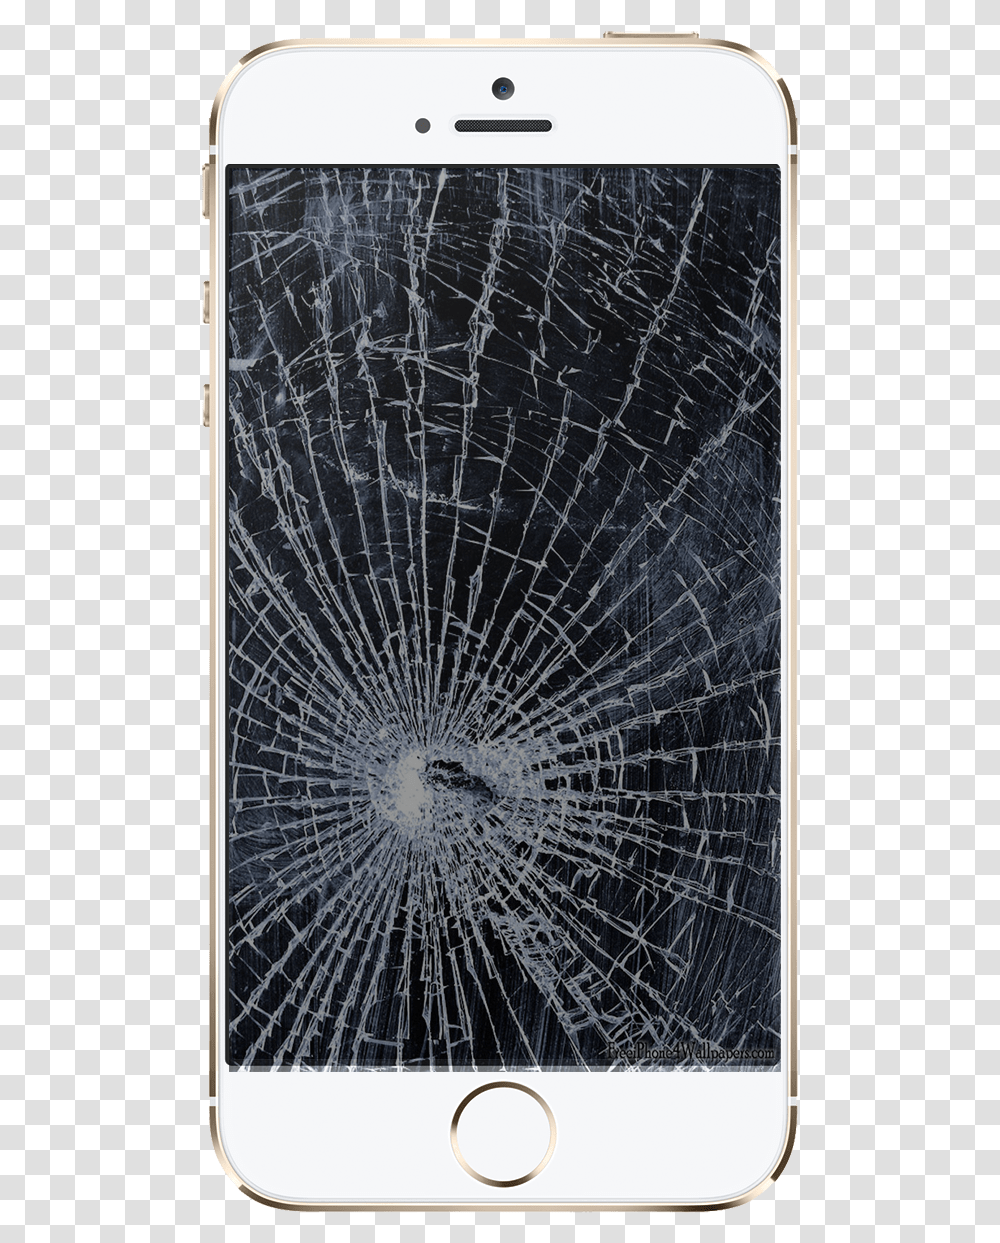 Broken Iphone Iphone Broken Screen, Mobile Phone, Electronics, Cell Phone, Spider Web Transparent Png